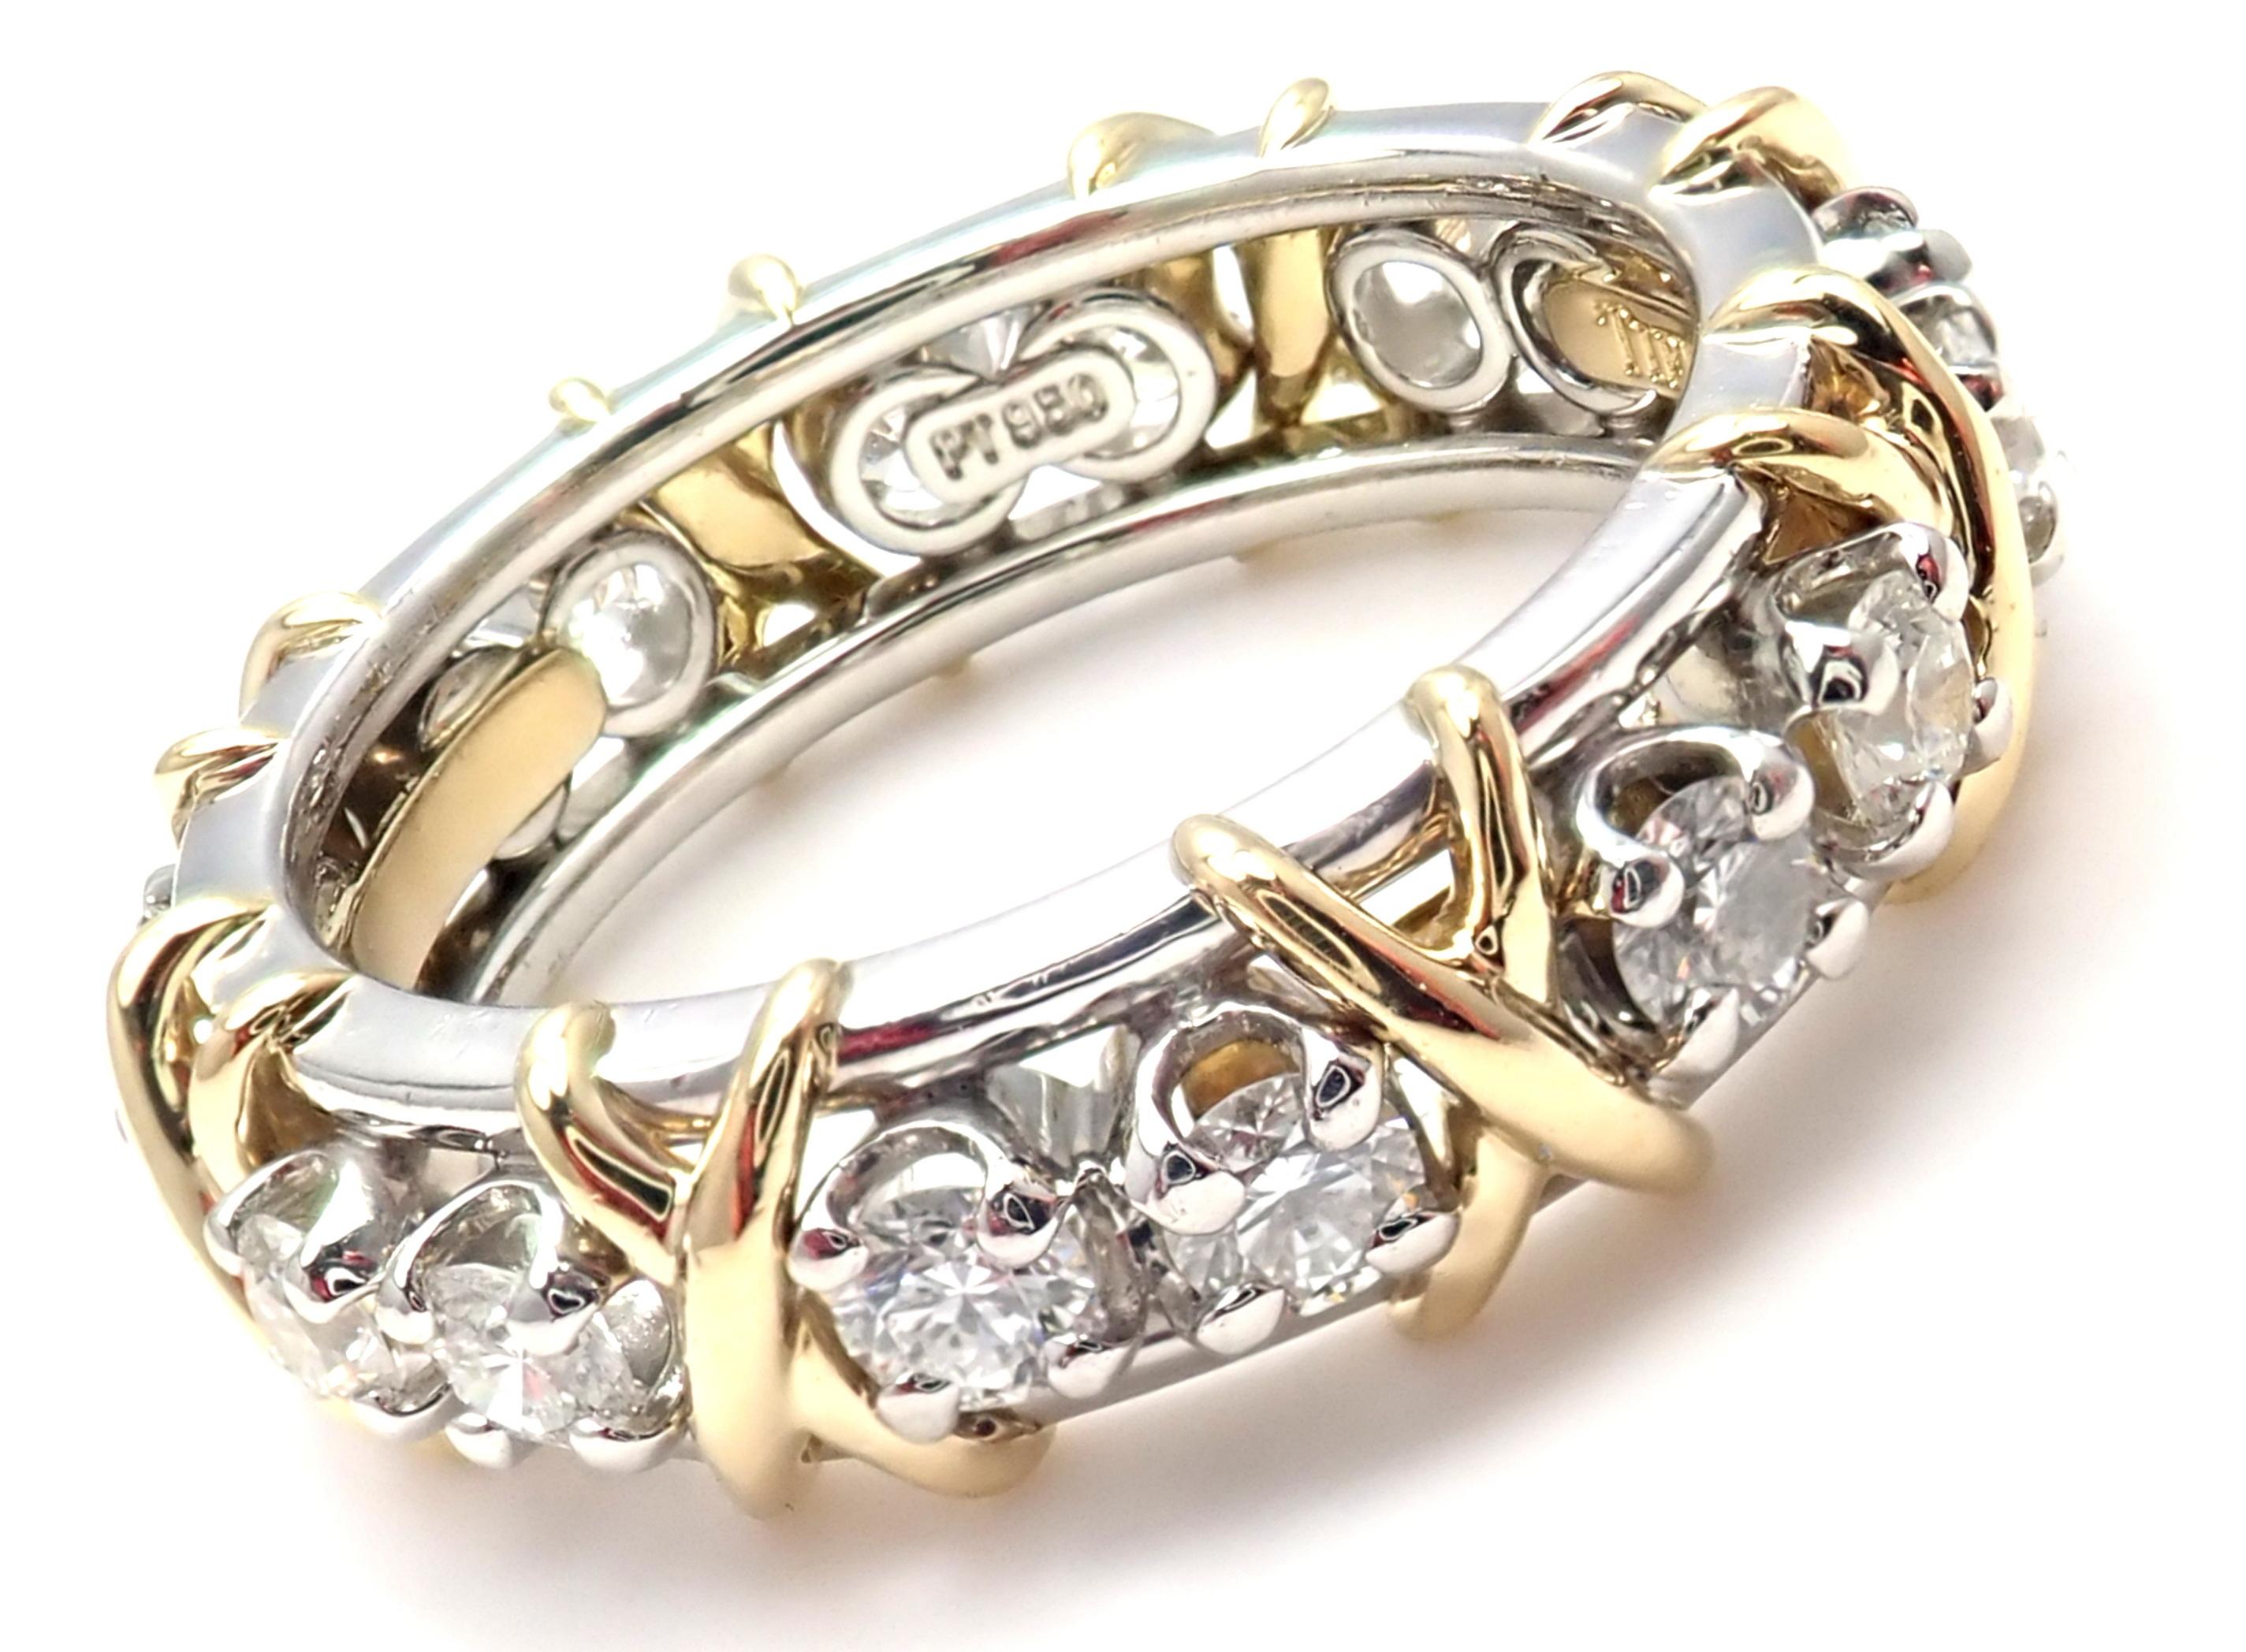 Women's or Men's Tiffany & Co. Jean Schlumberger Yellow Gold and Platinum Diamond Ring